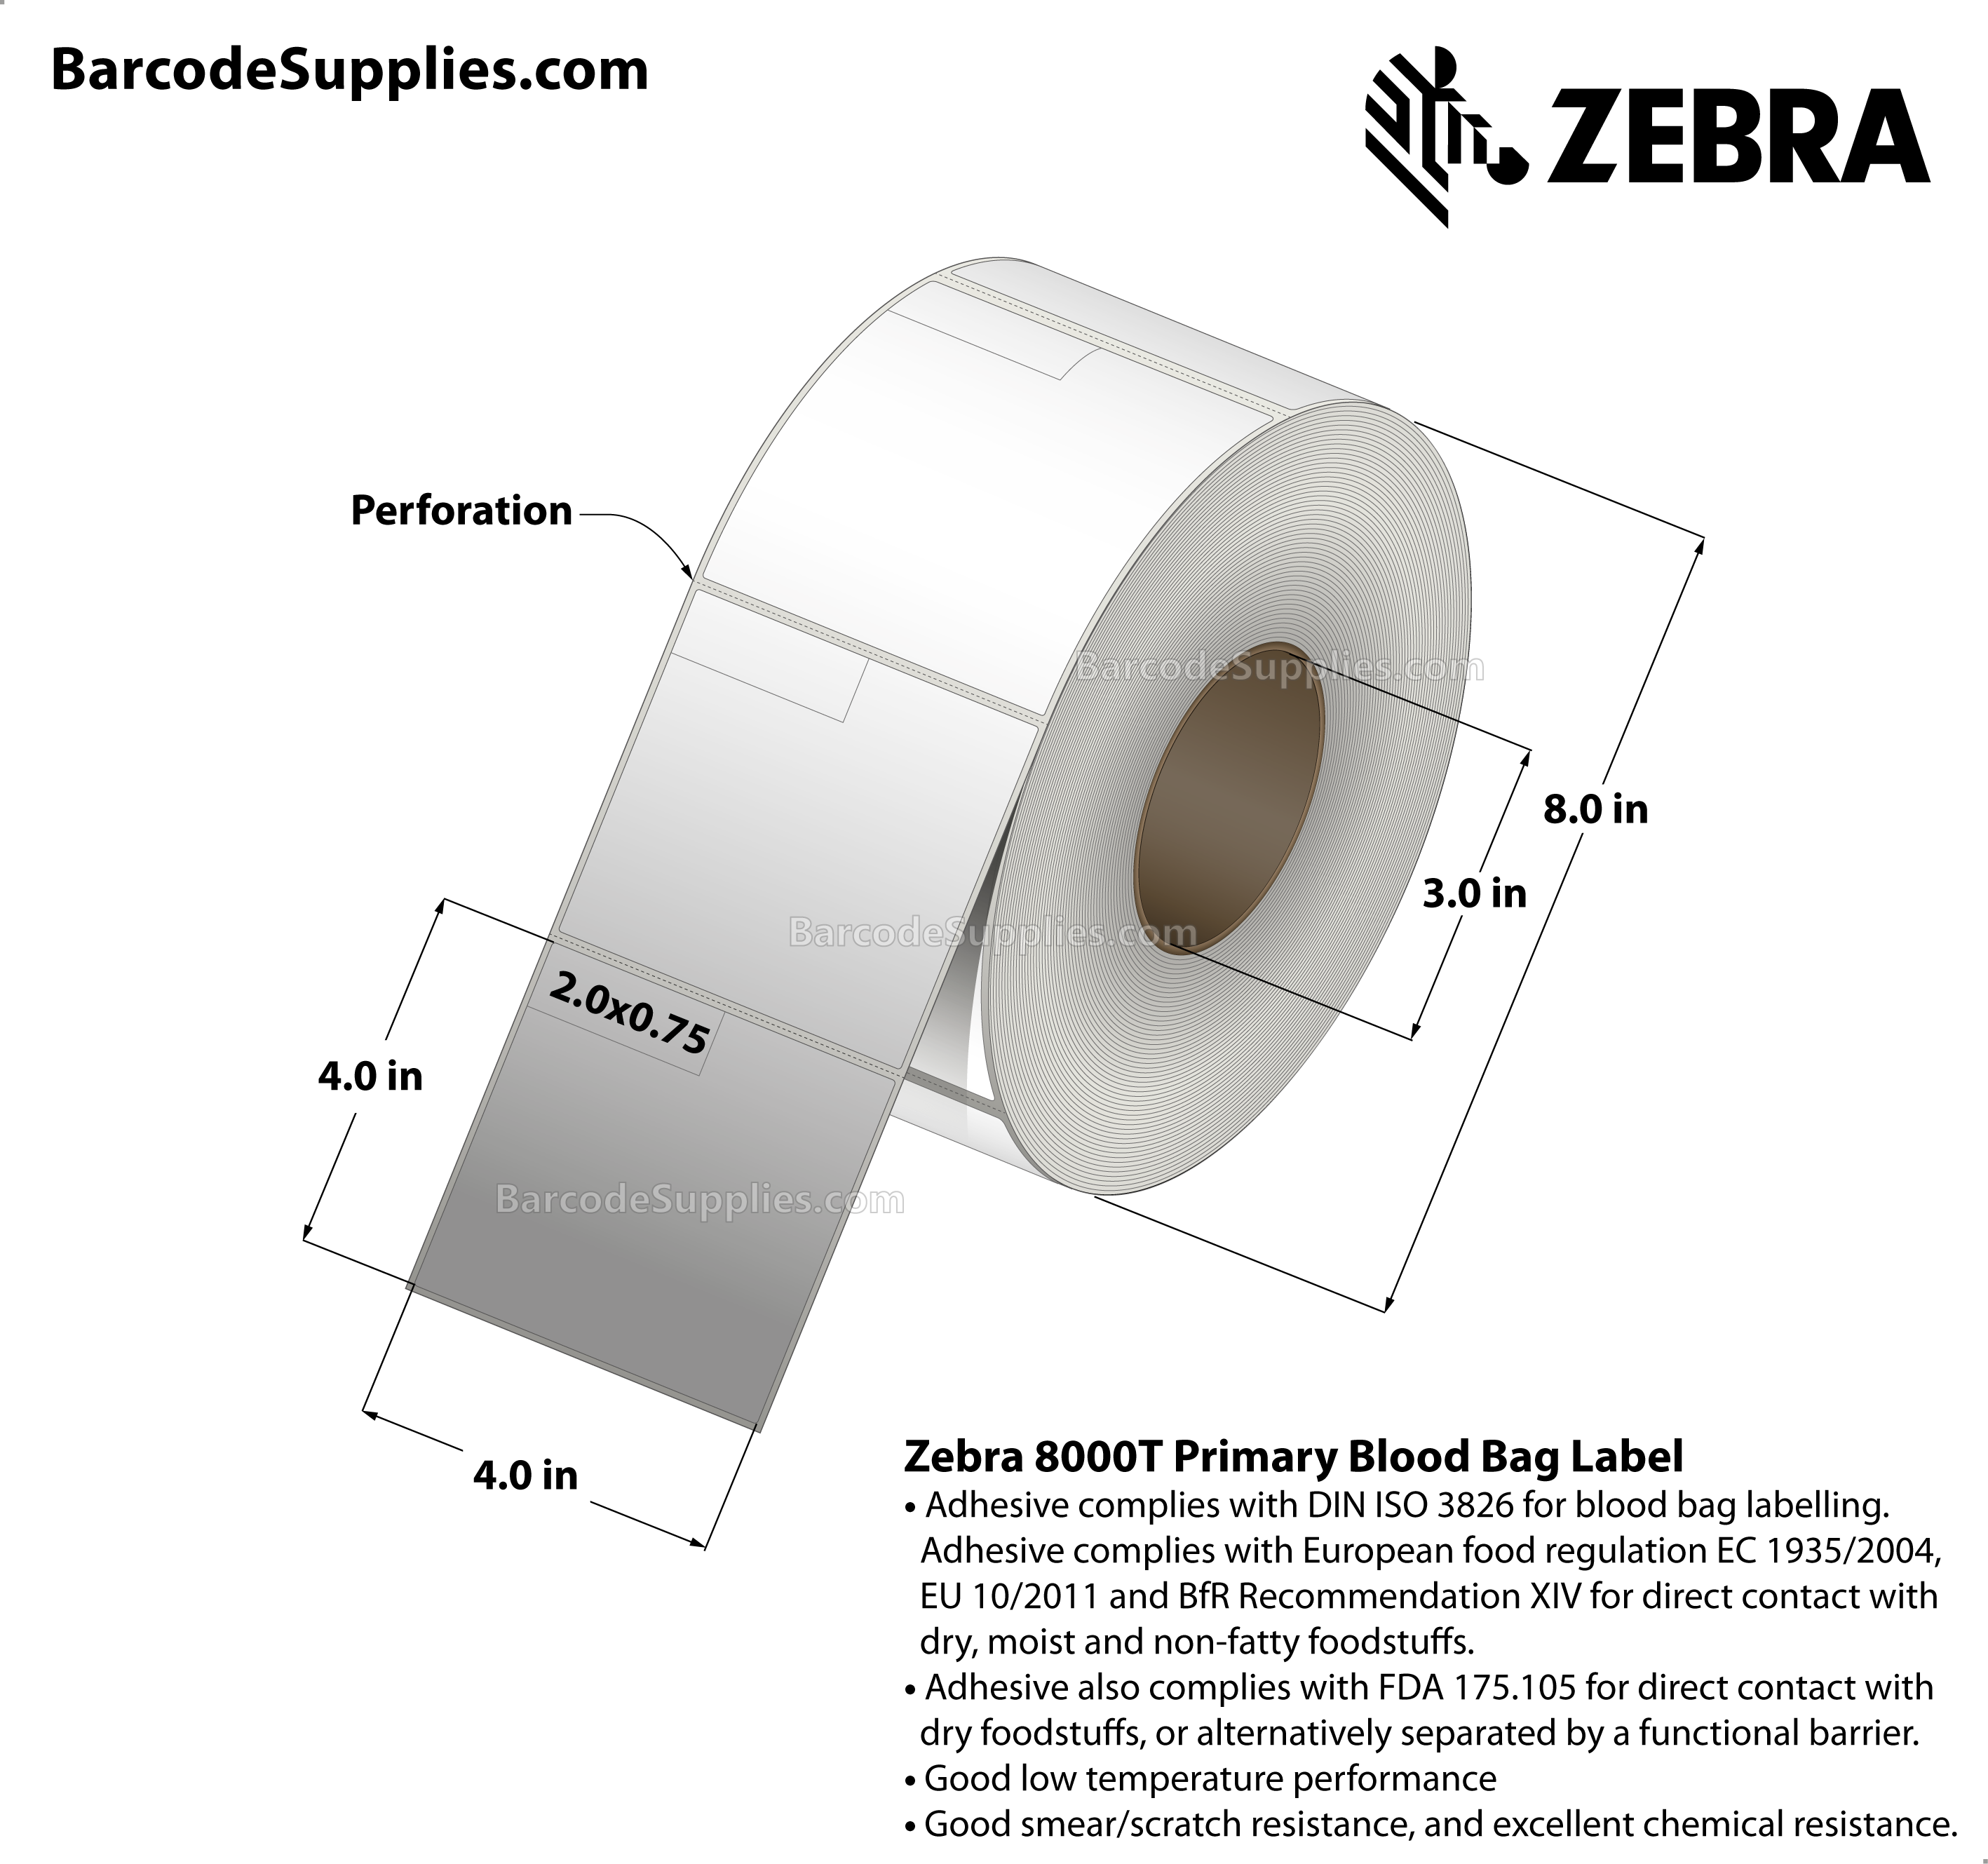 4 x 4 Thermal Transfer White 8000T Primary Blood Bag Label Labels With All-Temp Adhesive - ISBT128 Primary Blood Bag Label - Perforated - 1110 Labels Per Roll - Carton Of 4 Rolls - 4440 Labels Total - MPN: HC10000688